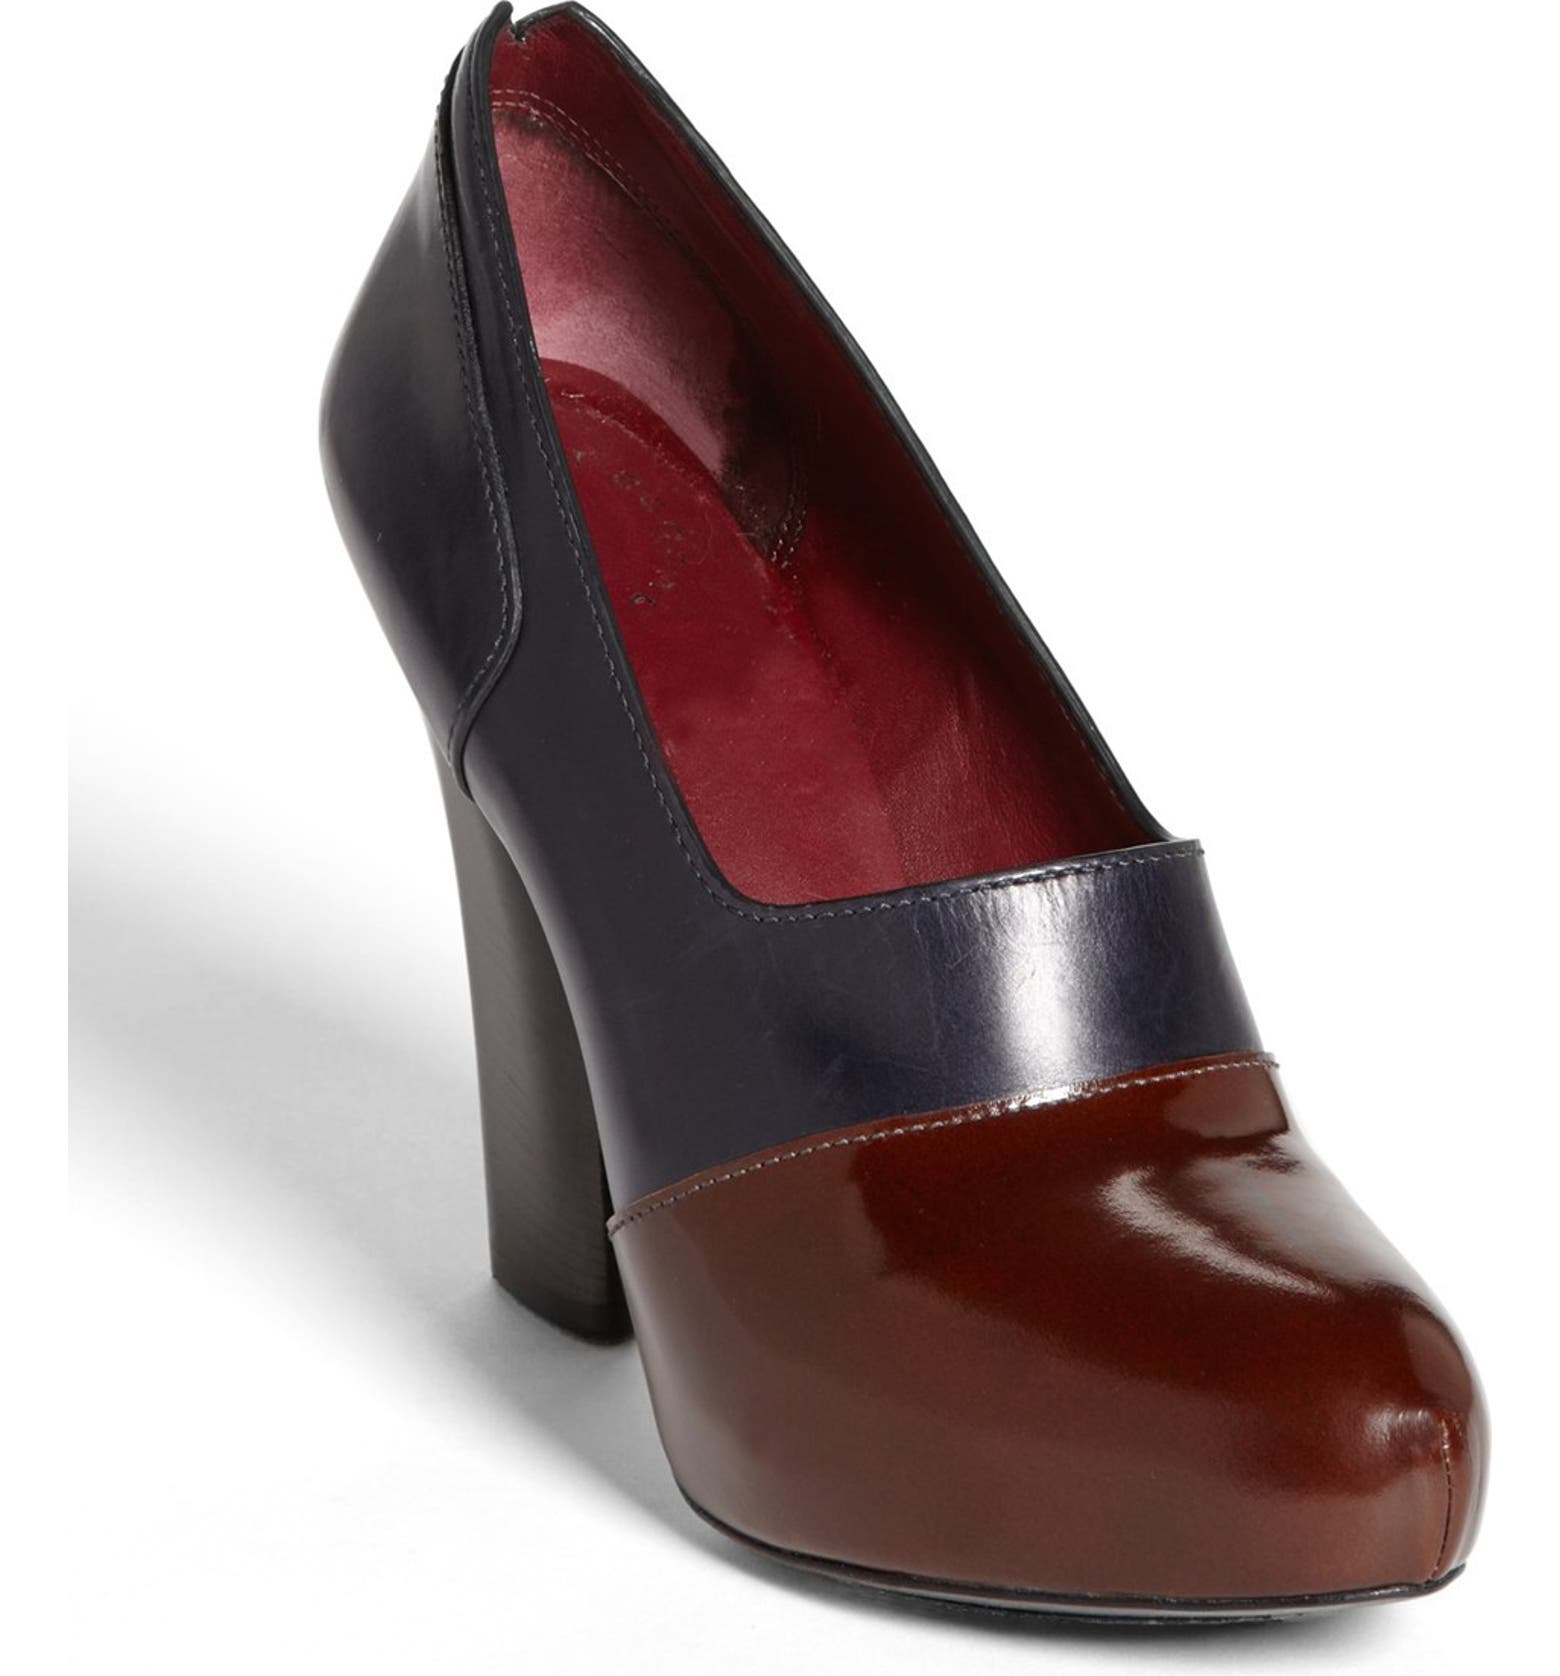 MARC BY MARC JACOBS 'Ultra High' Pump | Nordstrom